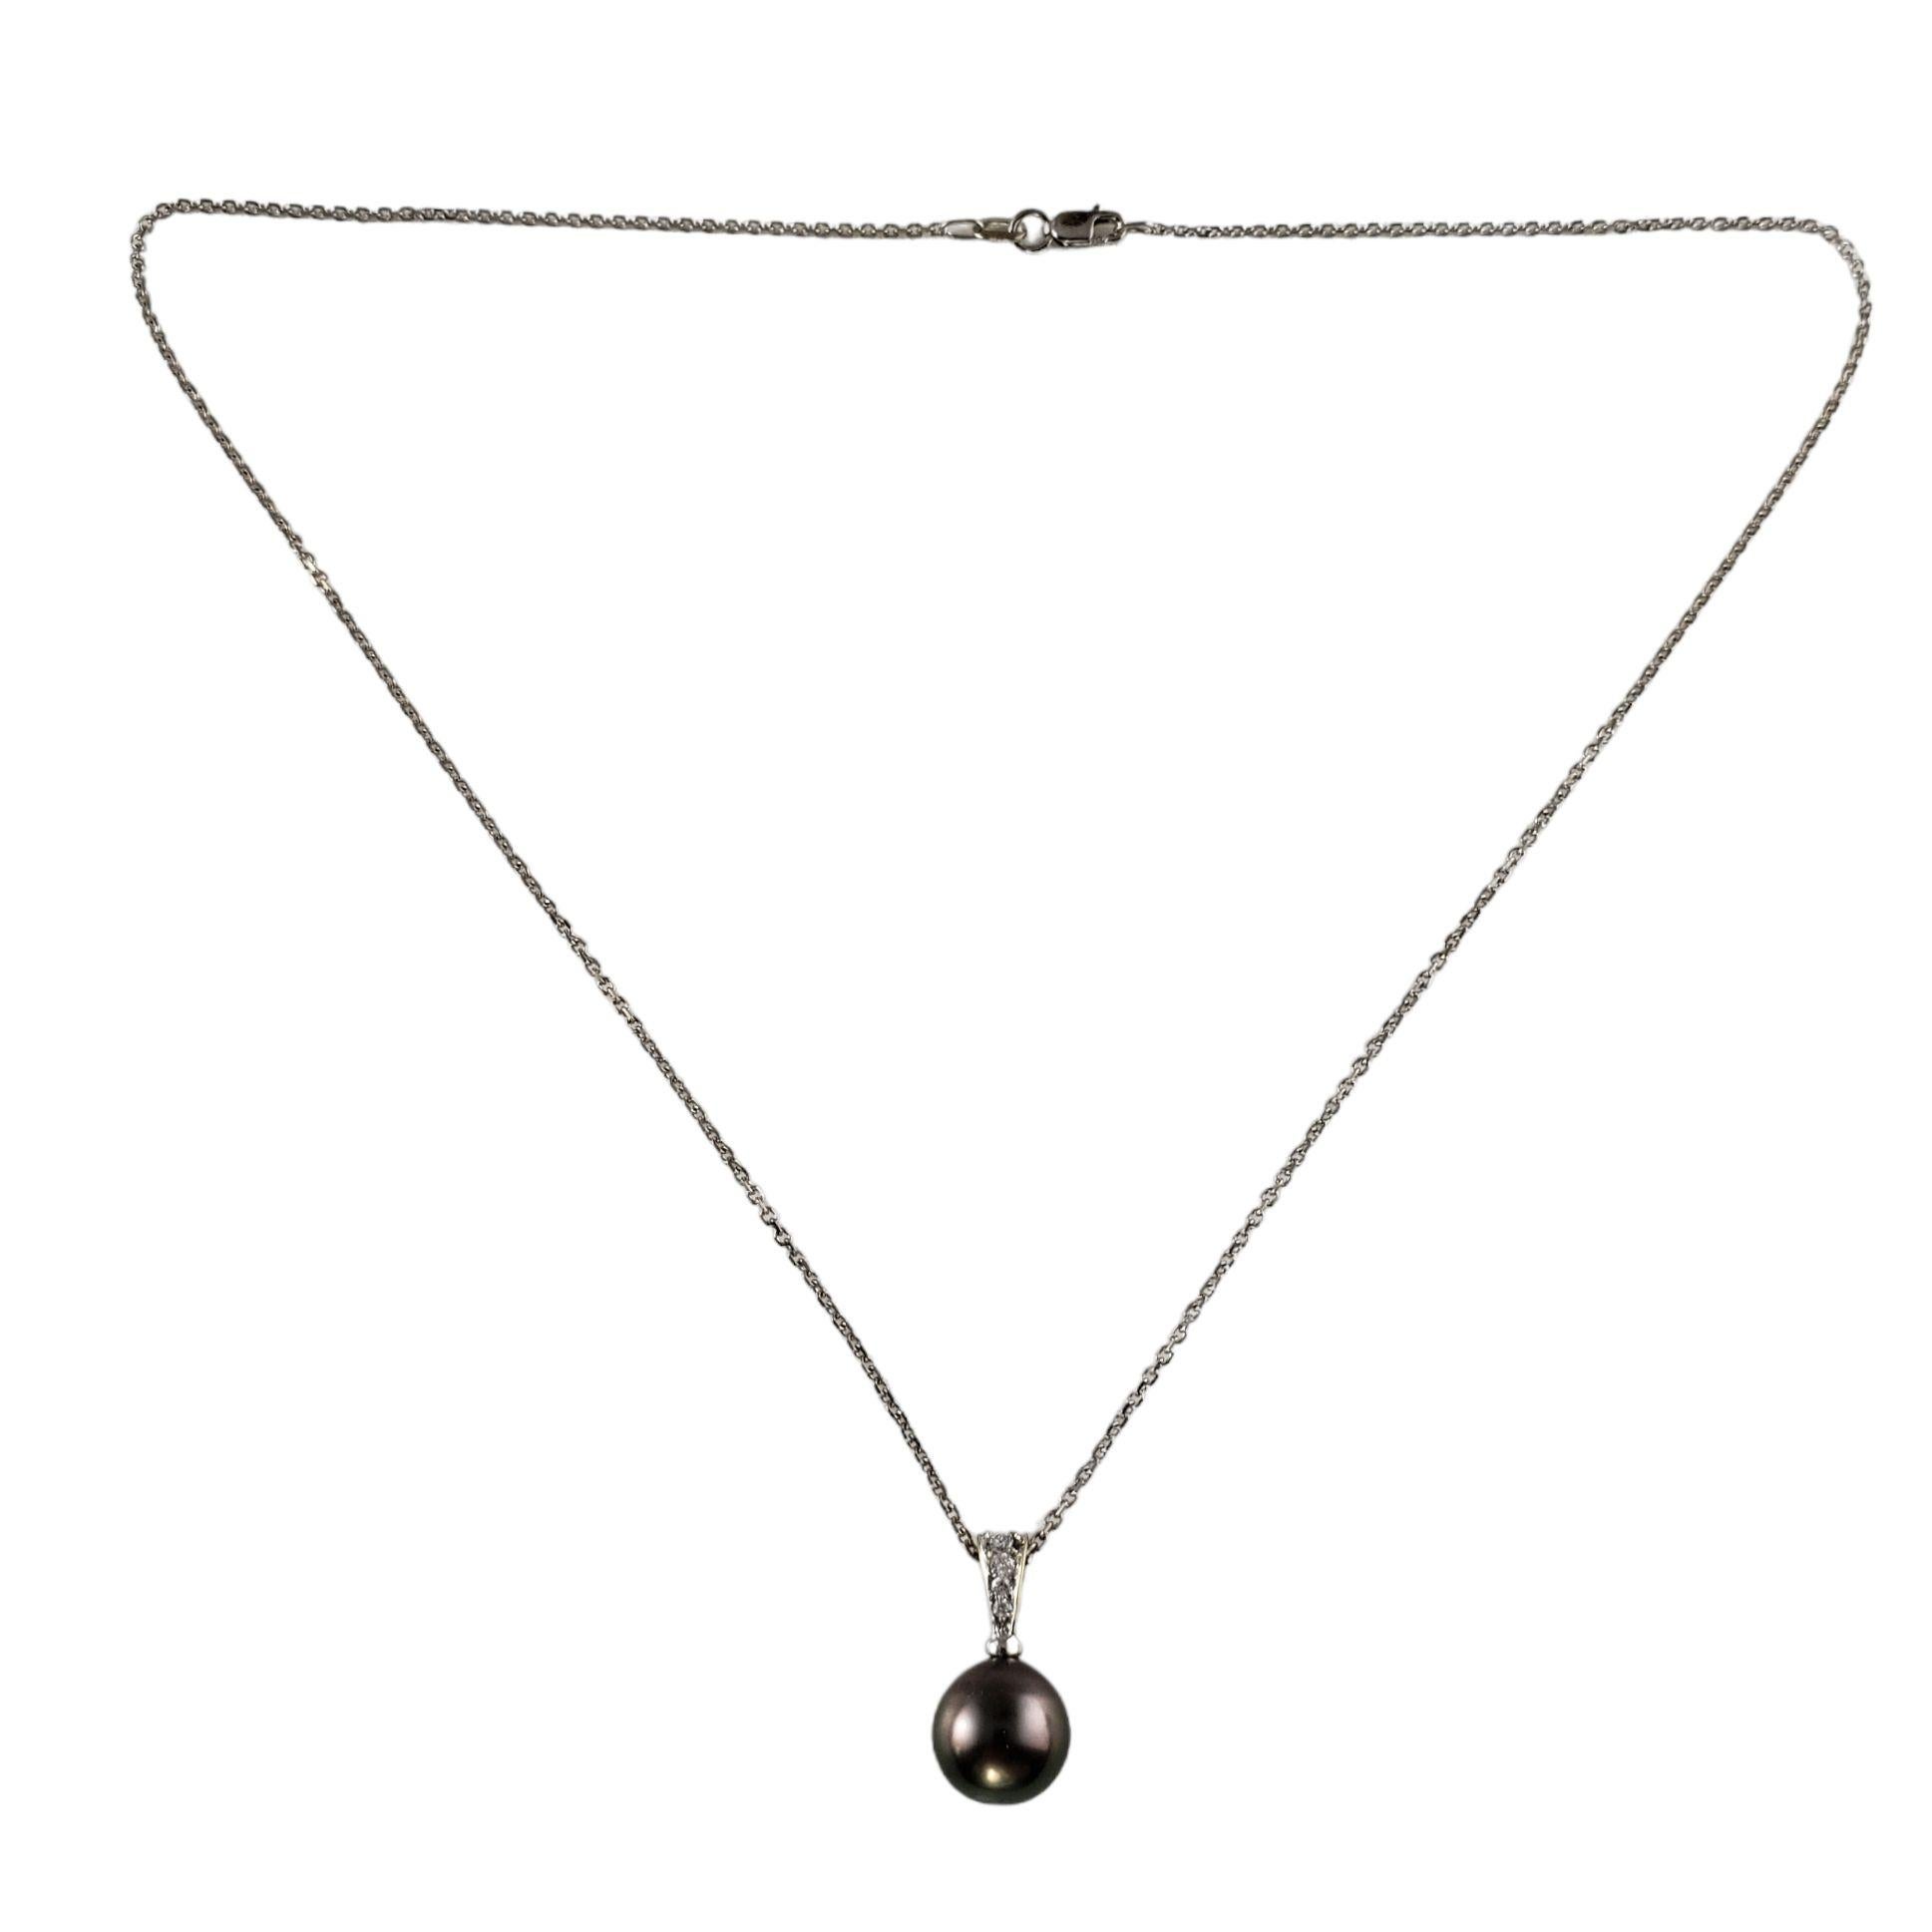 Vintage 18K/14K White Gold Black Pearl and Diamond Pendant Necklace-

This elegant 18K white gold pendant features one black pearl (10 mm) accented with four round brilliant cut diamonds. Suspends from a classic 14K white gold cable